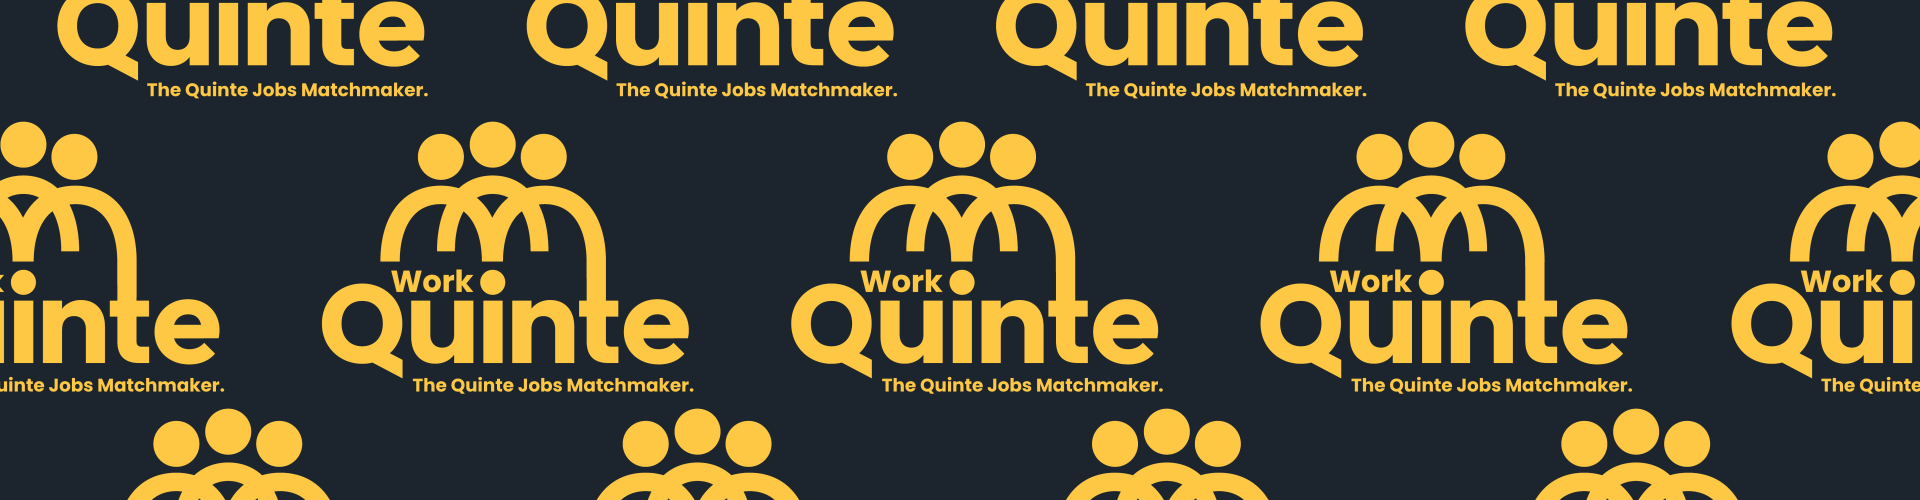 Black background with orange Work in Quinte logo and The Quinte Jobs Matchmaker tagline.